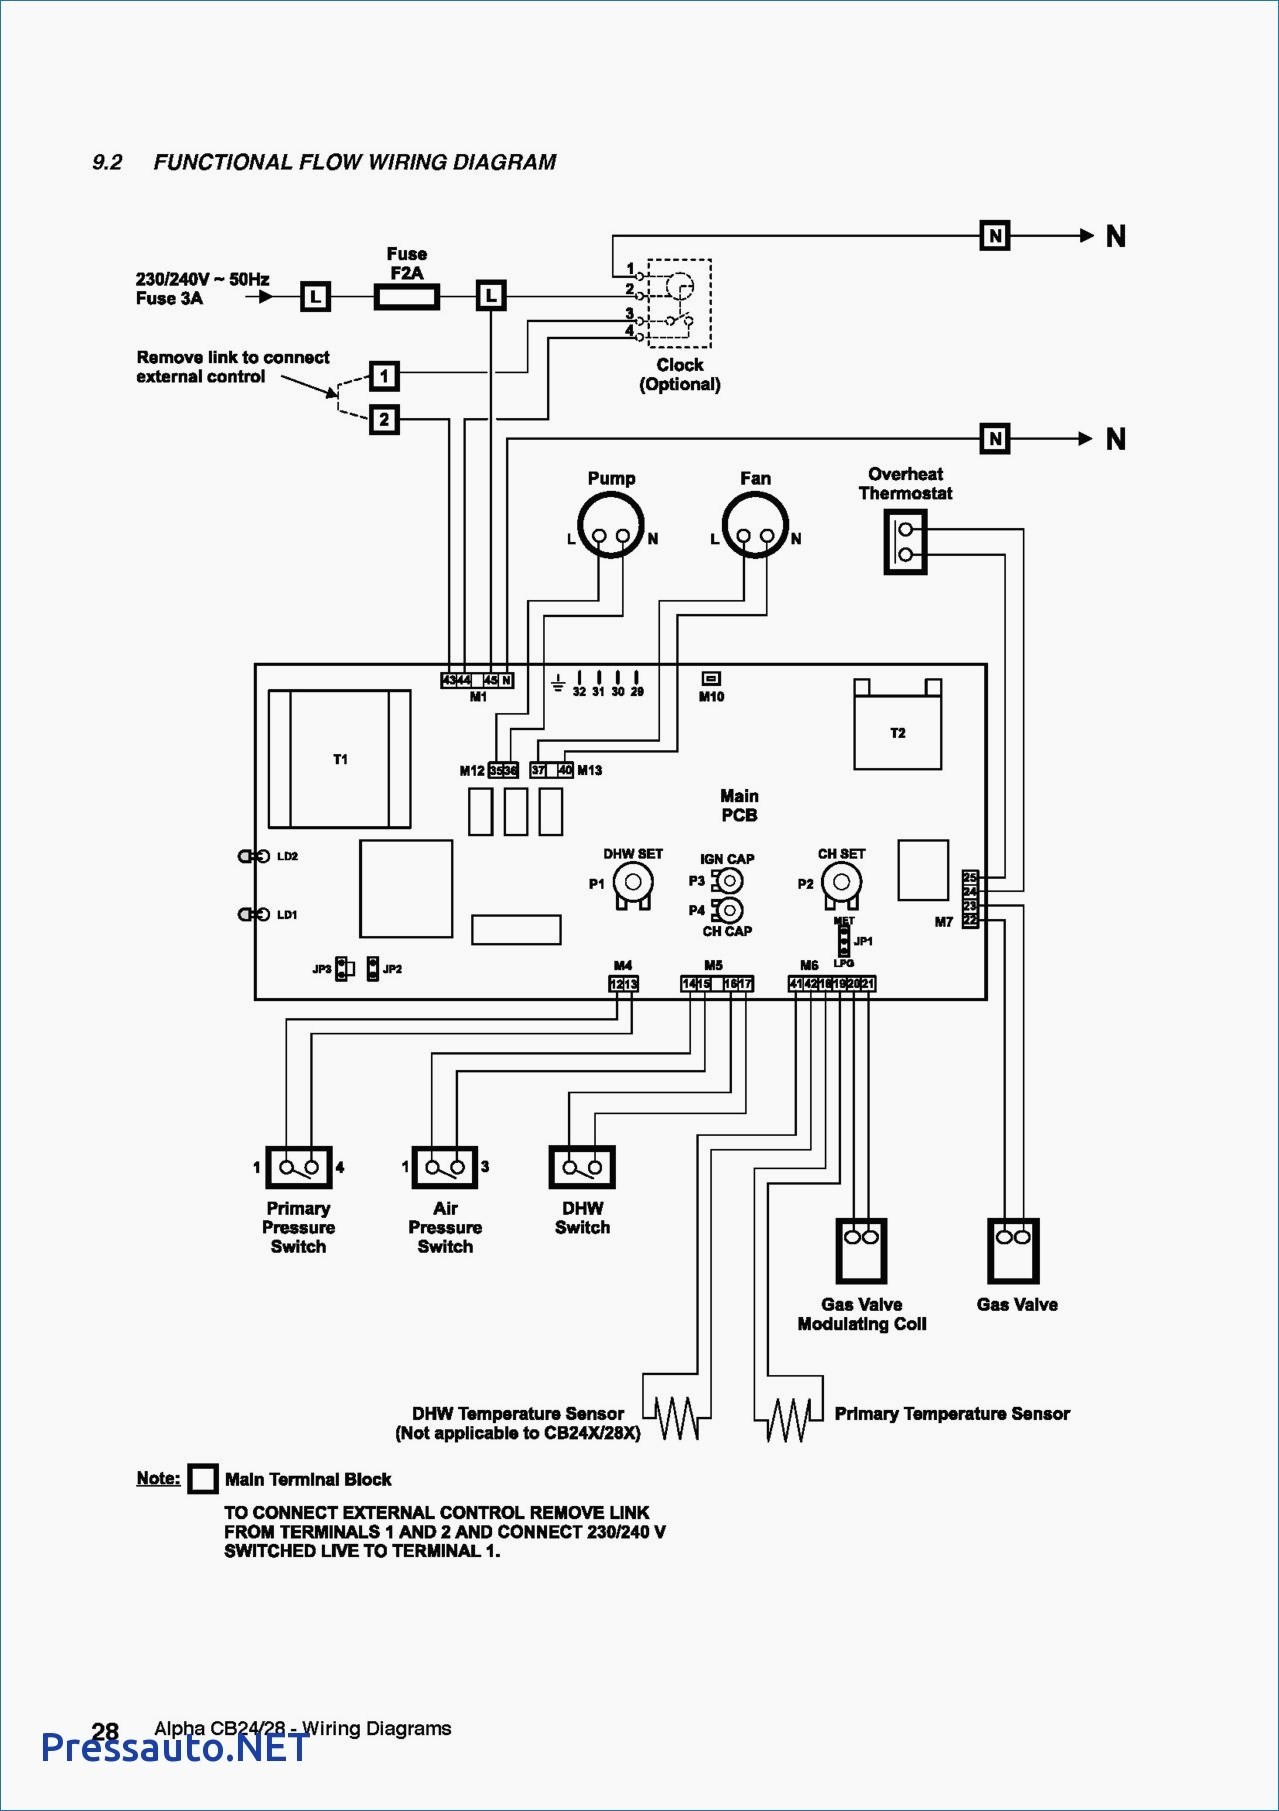 Honeywell Relay Wiring Diagram Awesome Honeywell Relay Wiring Diagram Best Honeywell Aquastat Wiring